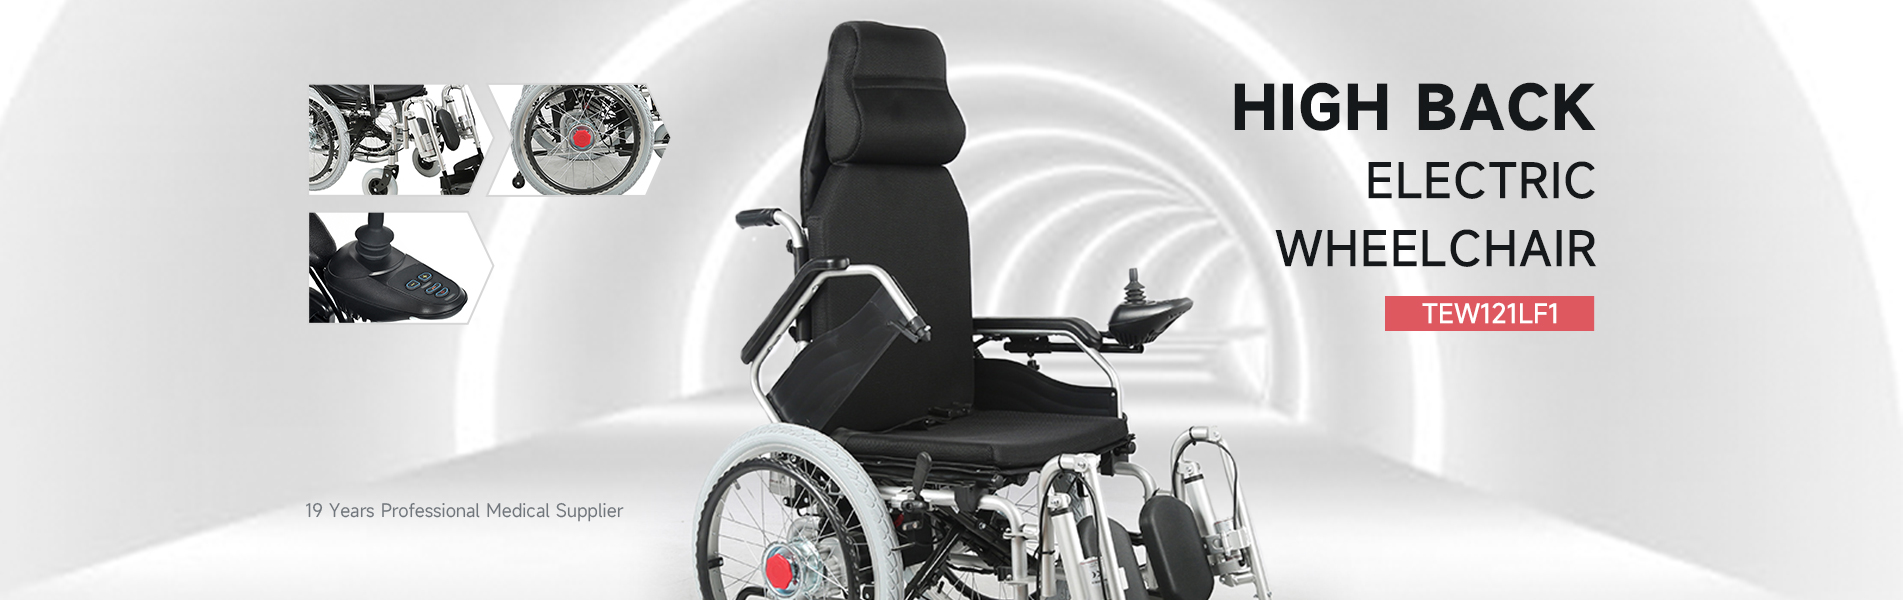 Experience in the use, maintenance, and upkeep of wheelchairs